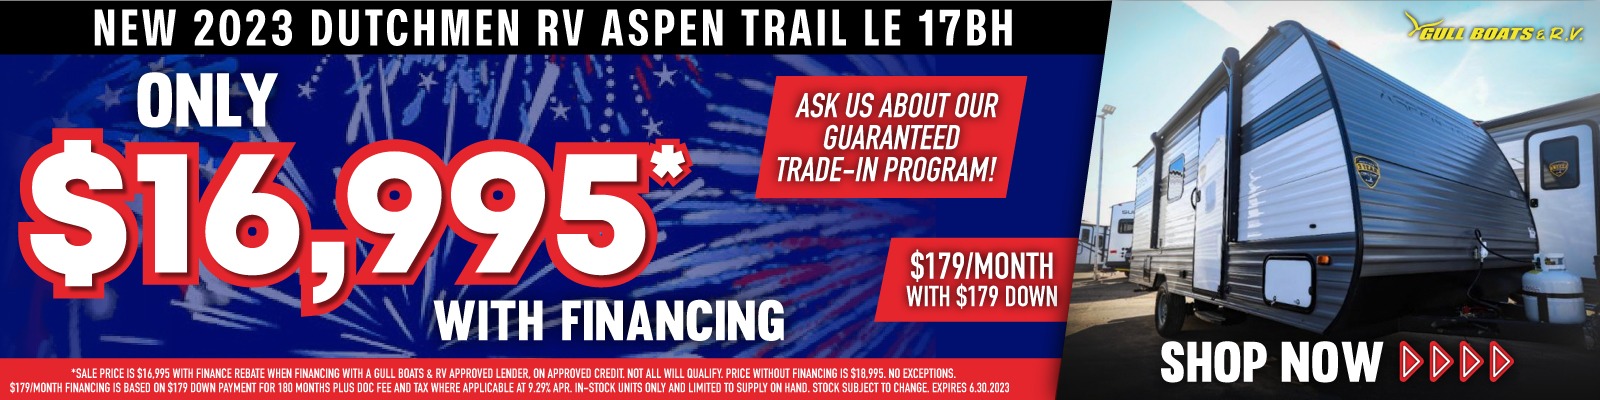 Aspen Trail LE 17BH starting at $16,995*